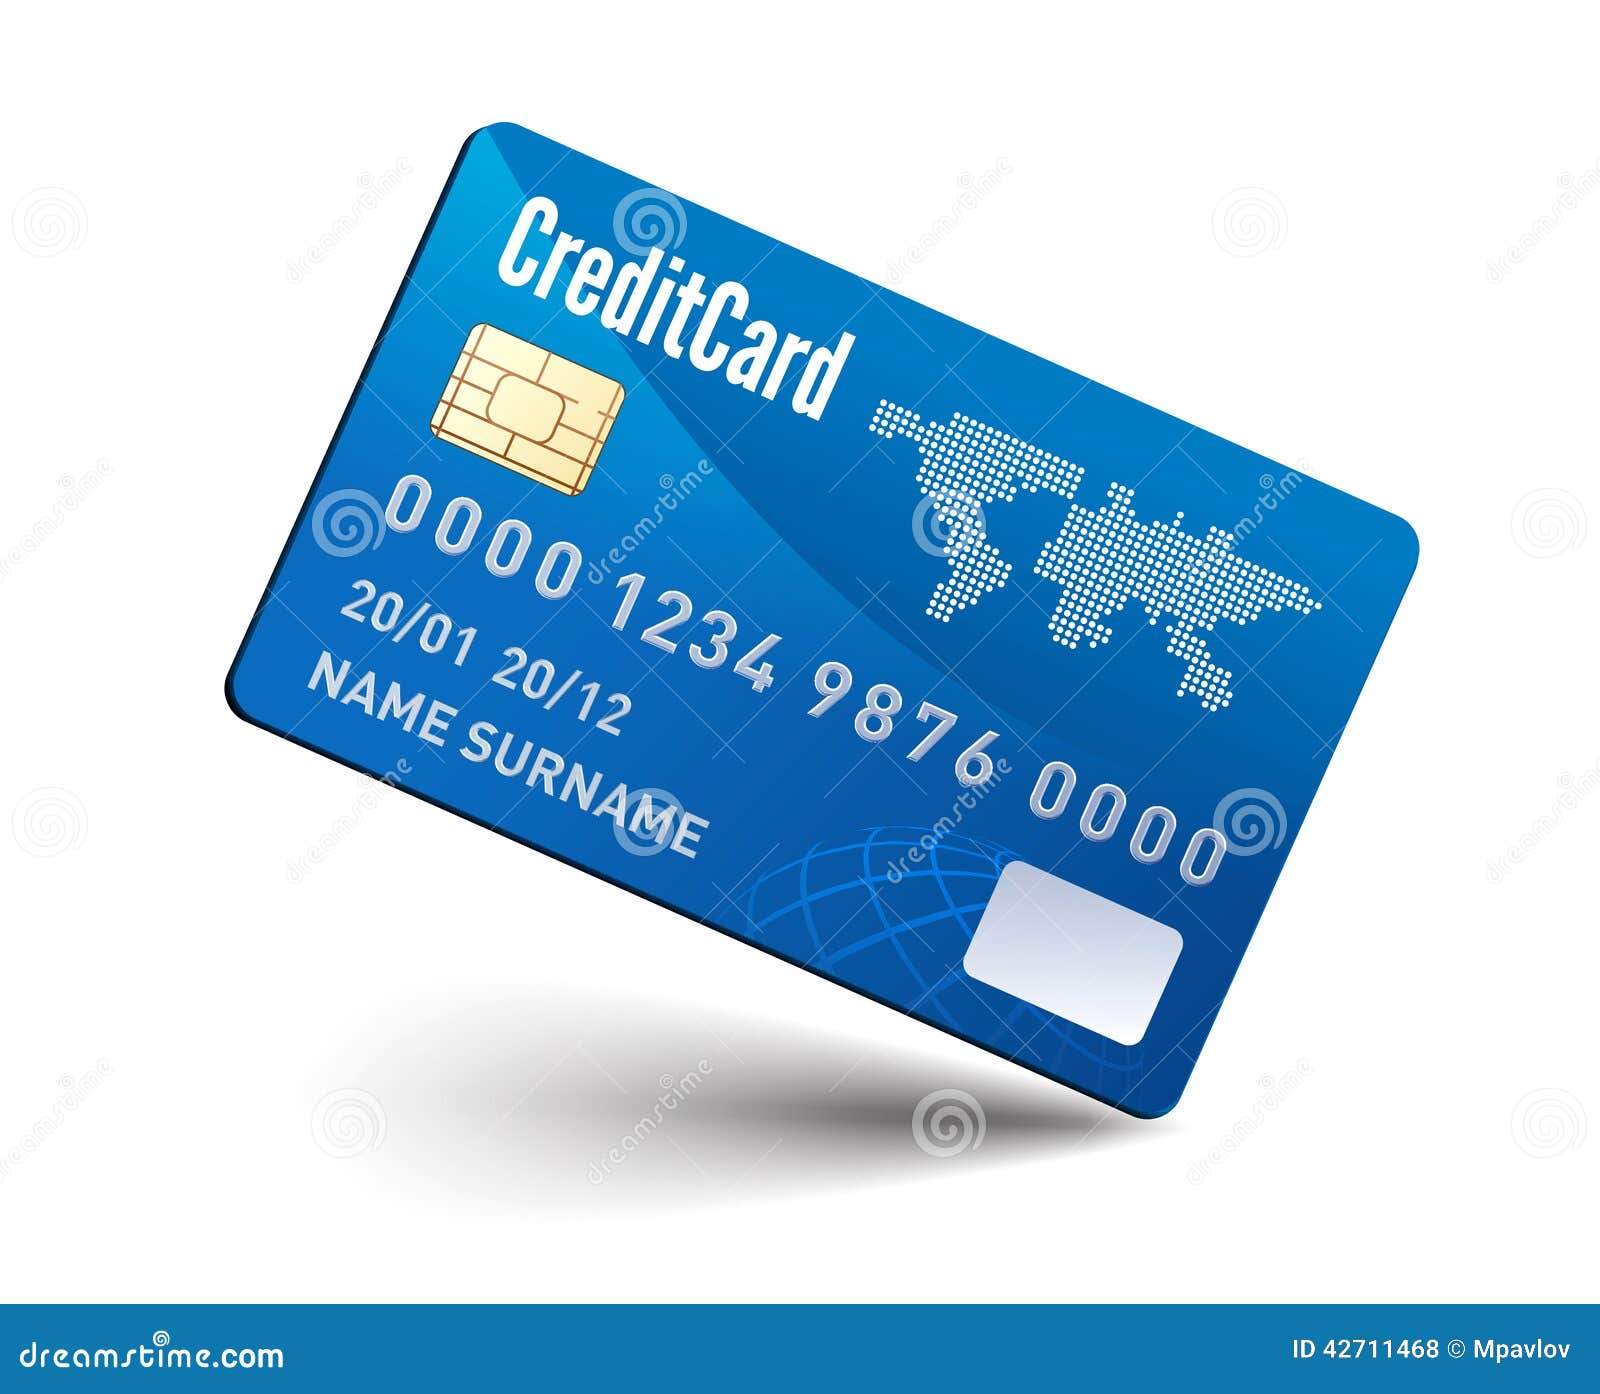 Realistic Vector Credit Card Stock Vector - Image: 42711468